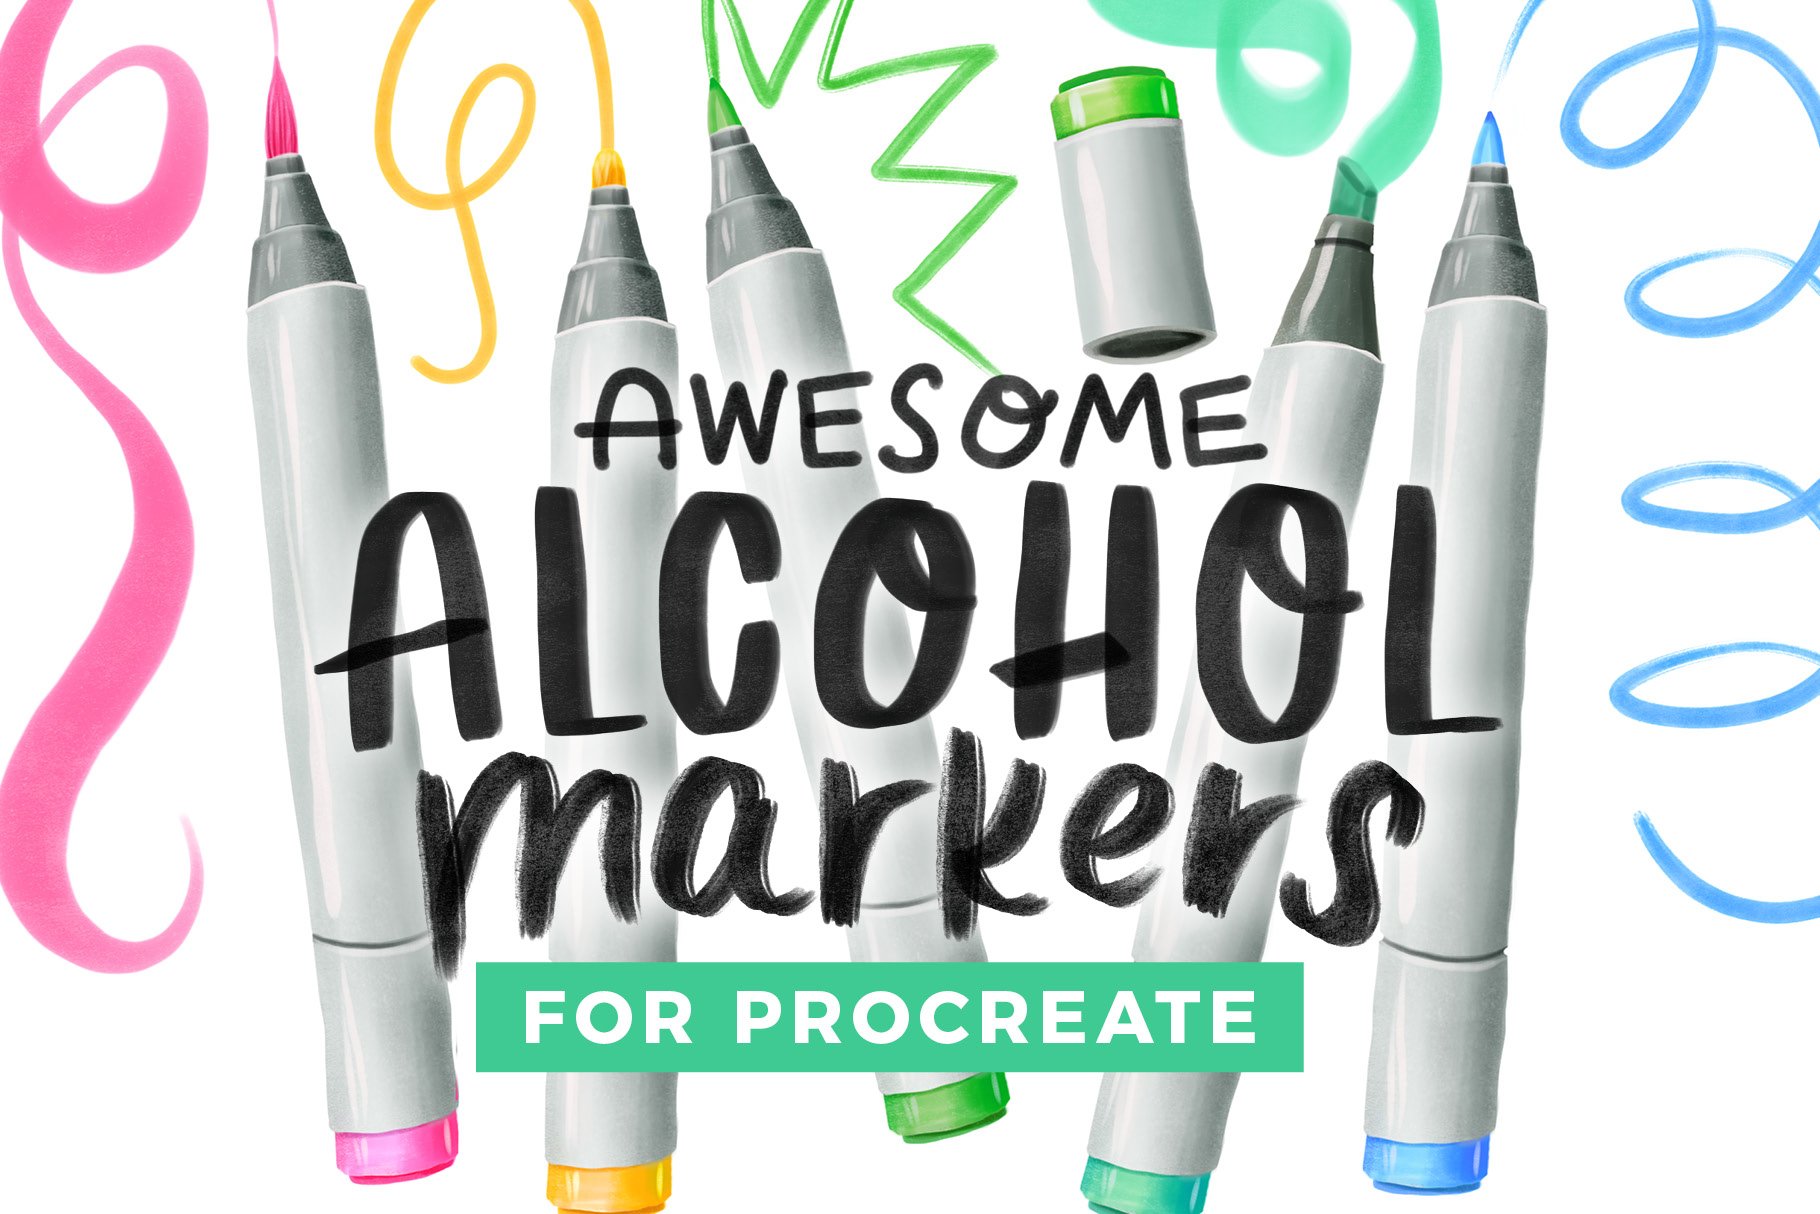 Awesome Alcohol Markers for Procreate